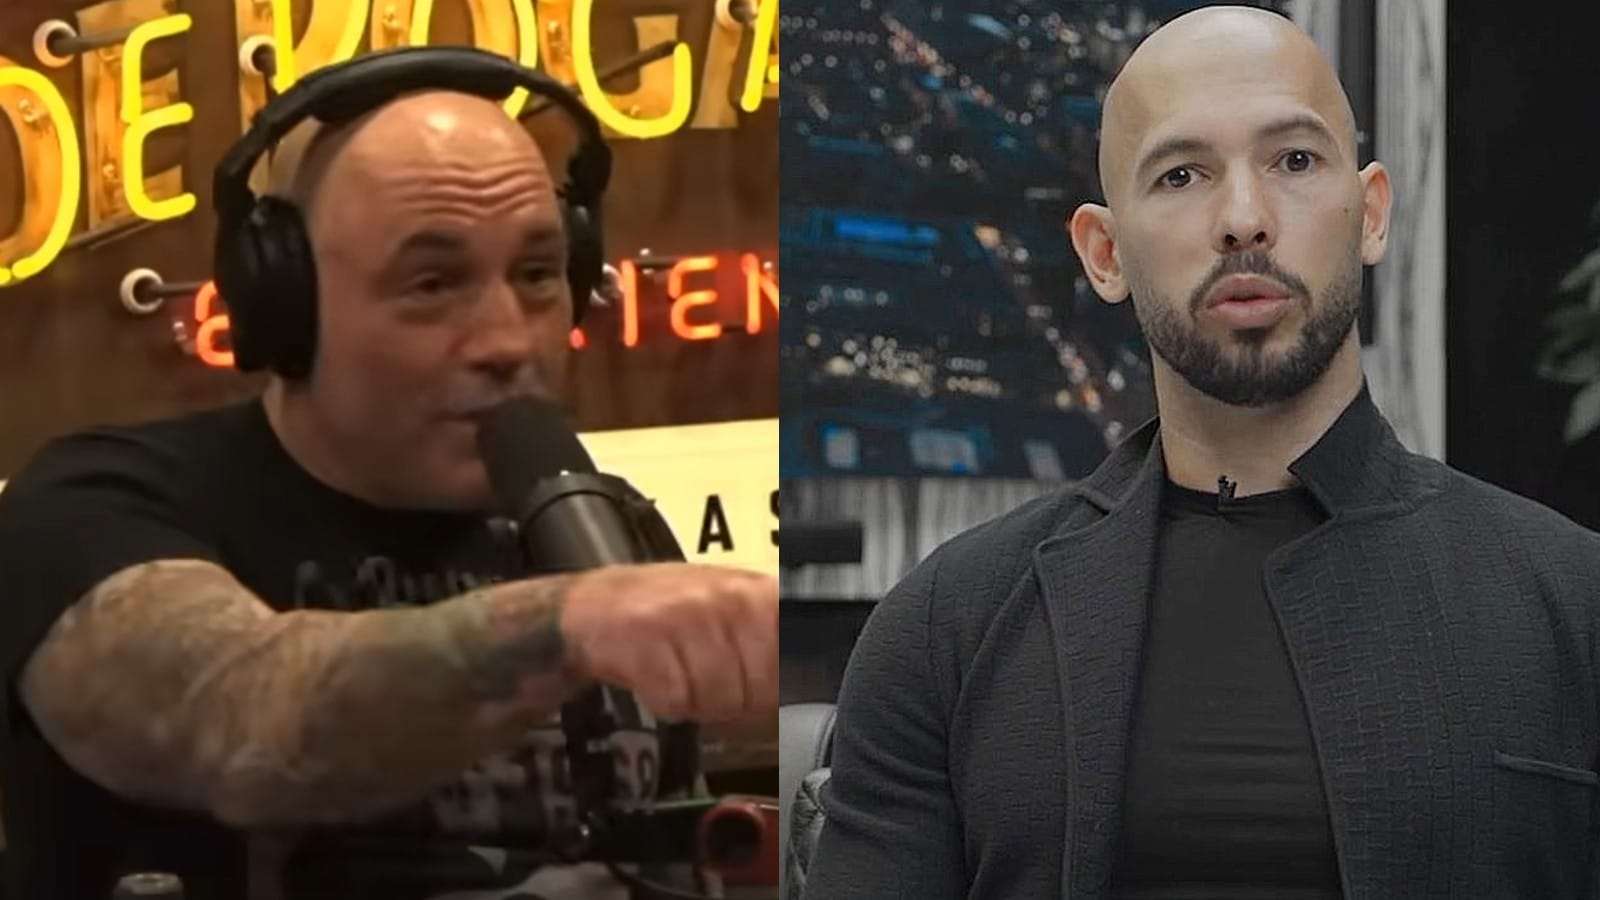 Joe Rogan shares his thoughts on Andrew Tate social media ban and Tate in goodbye video